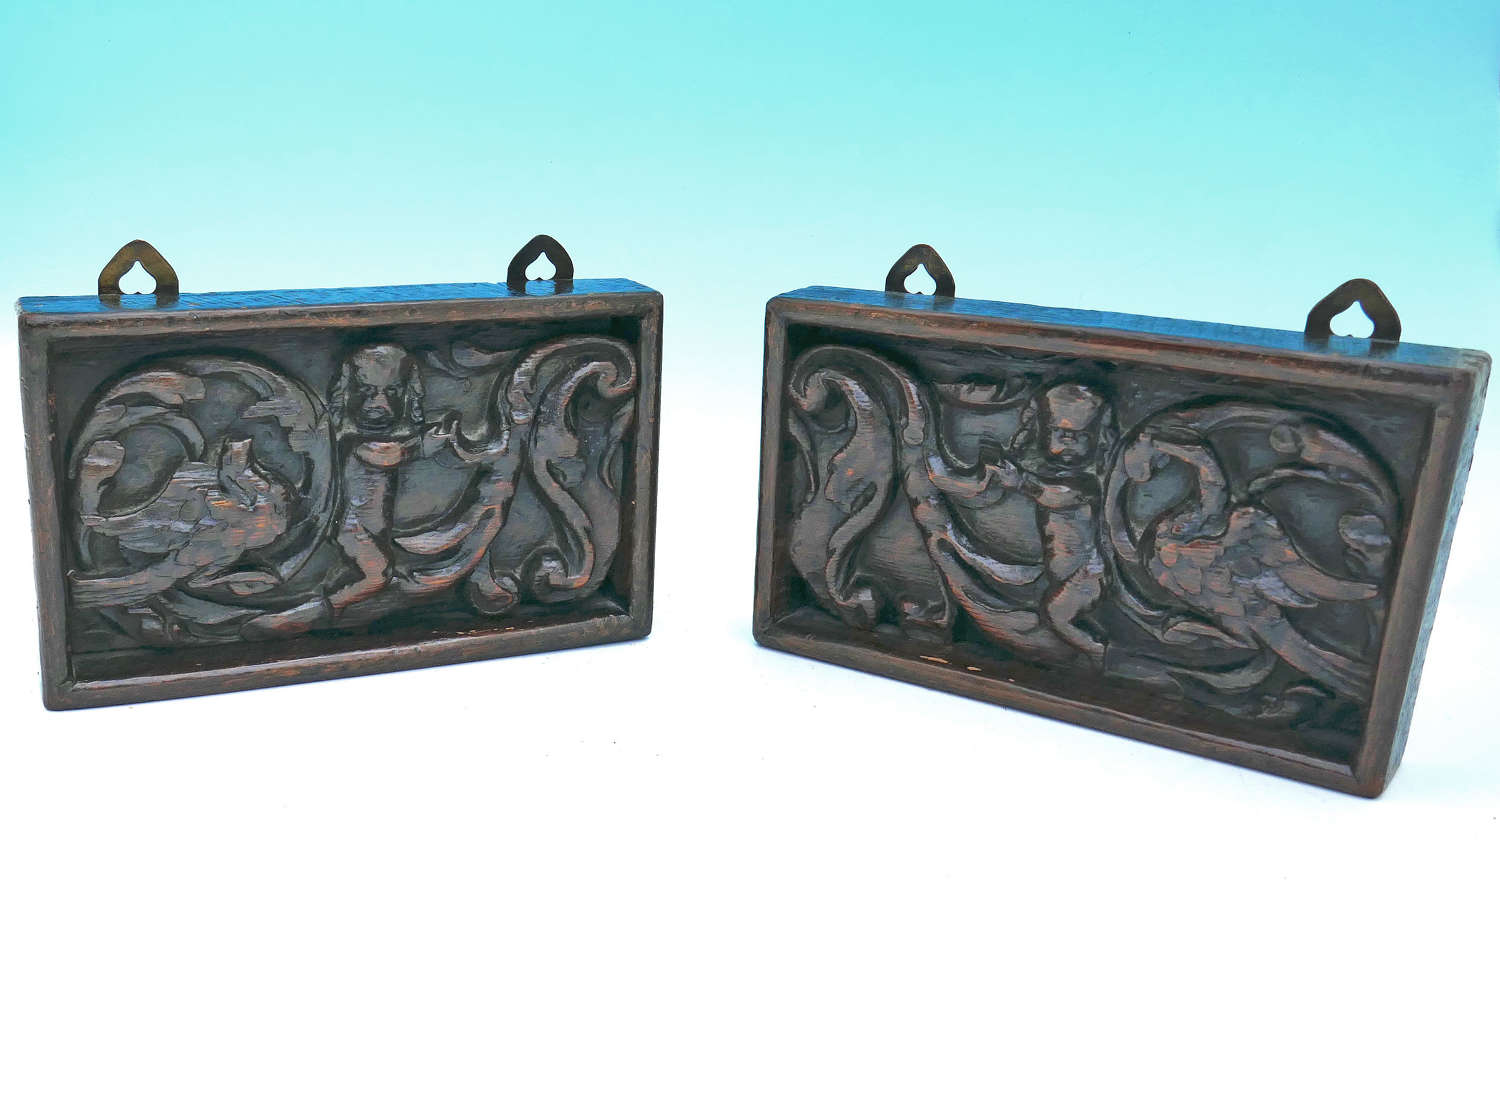 Antique Pair Of 17thc Oak Carved Panels With Cherubs And Birds.Flemish